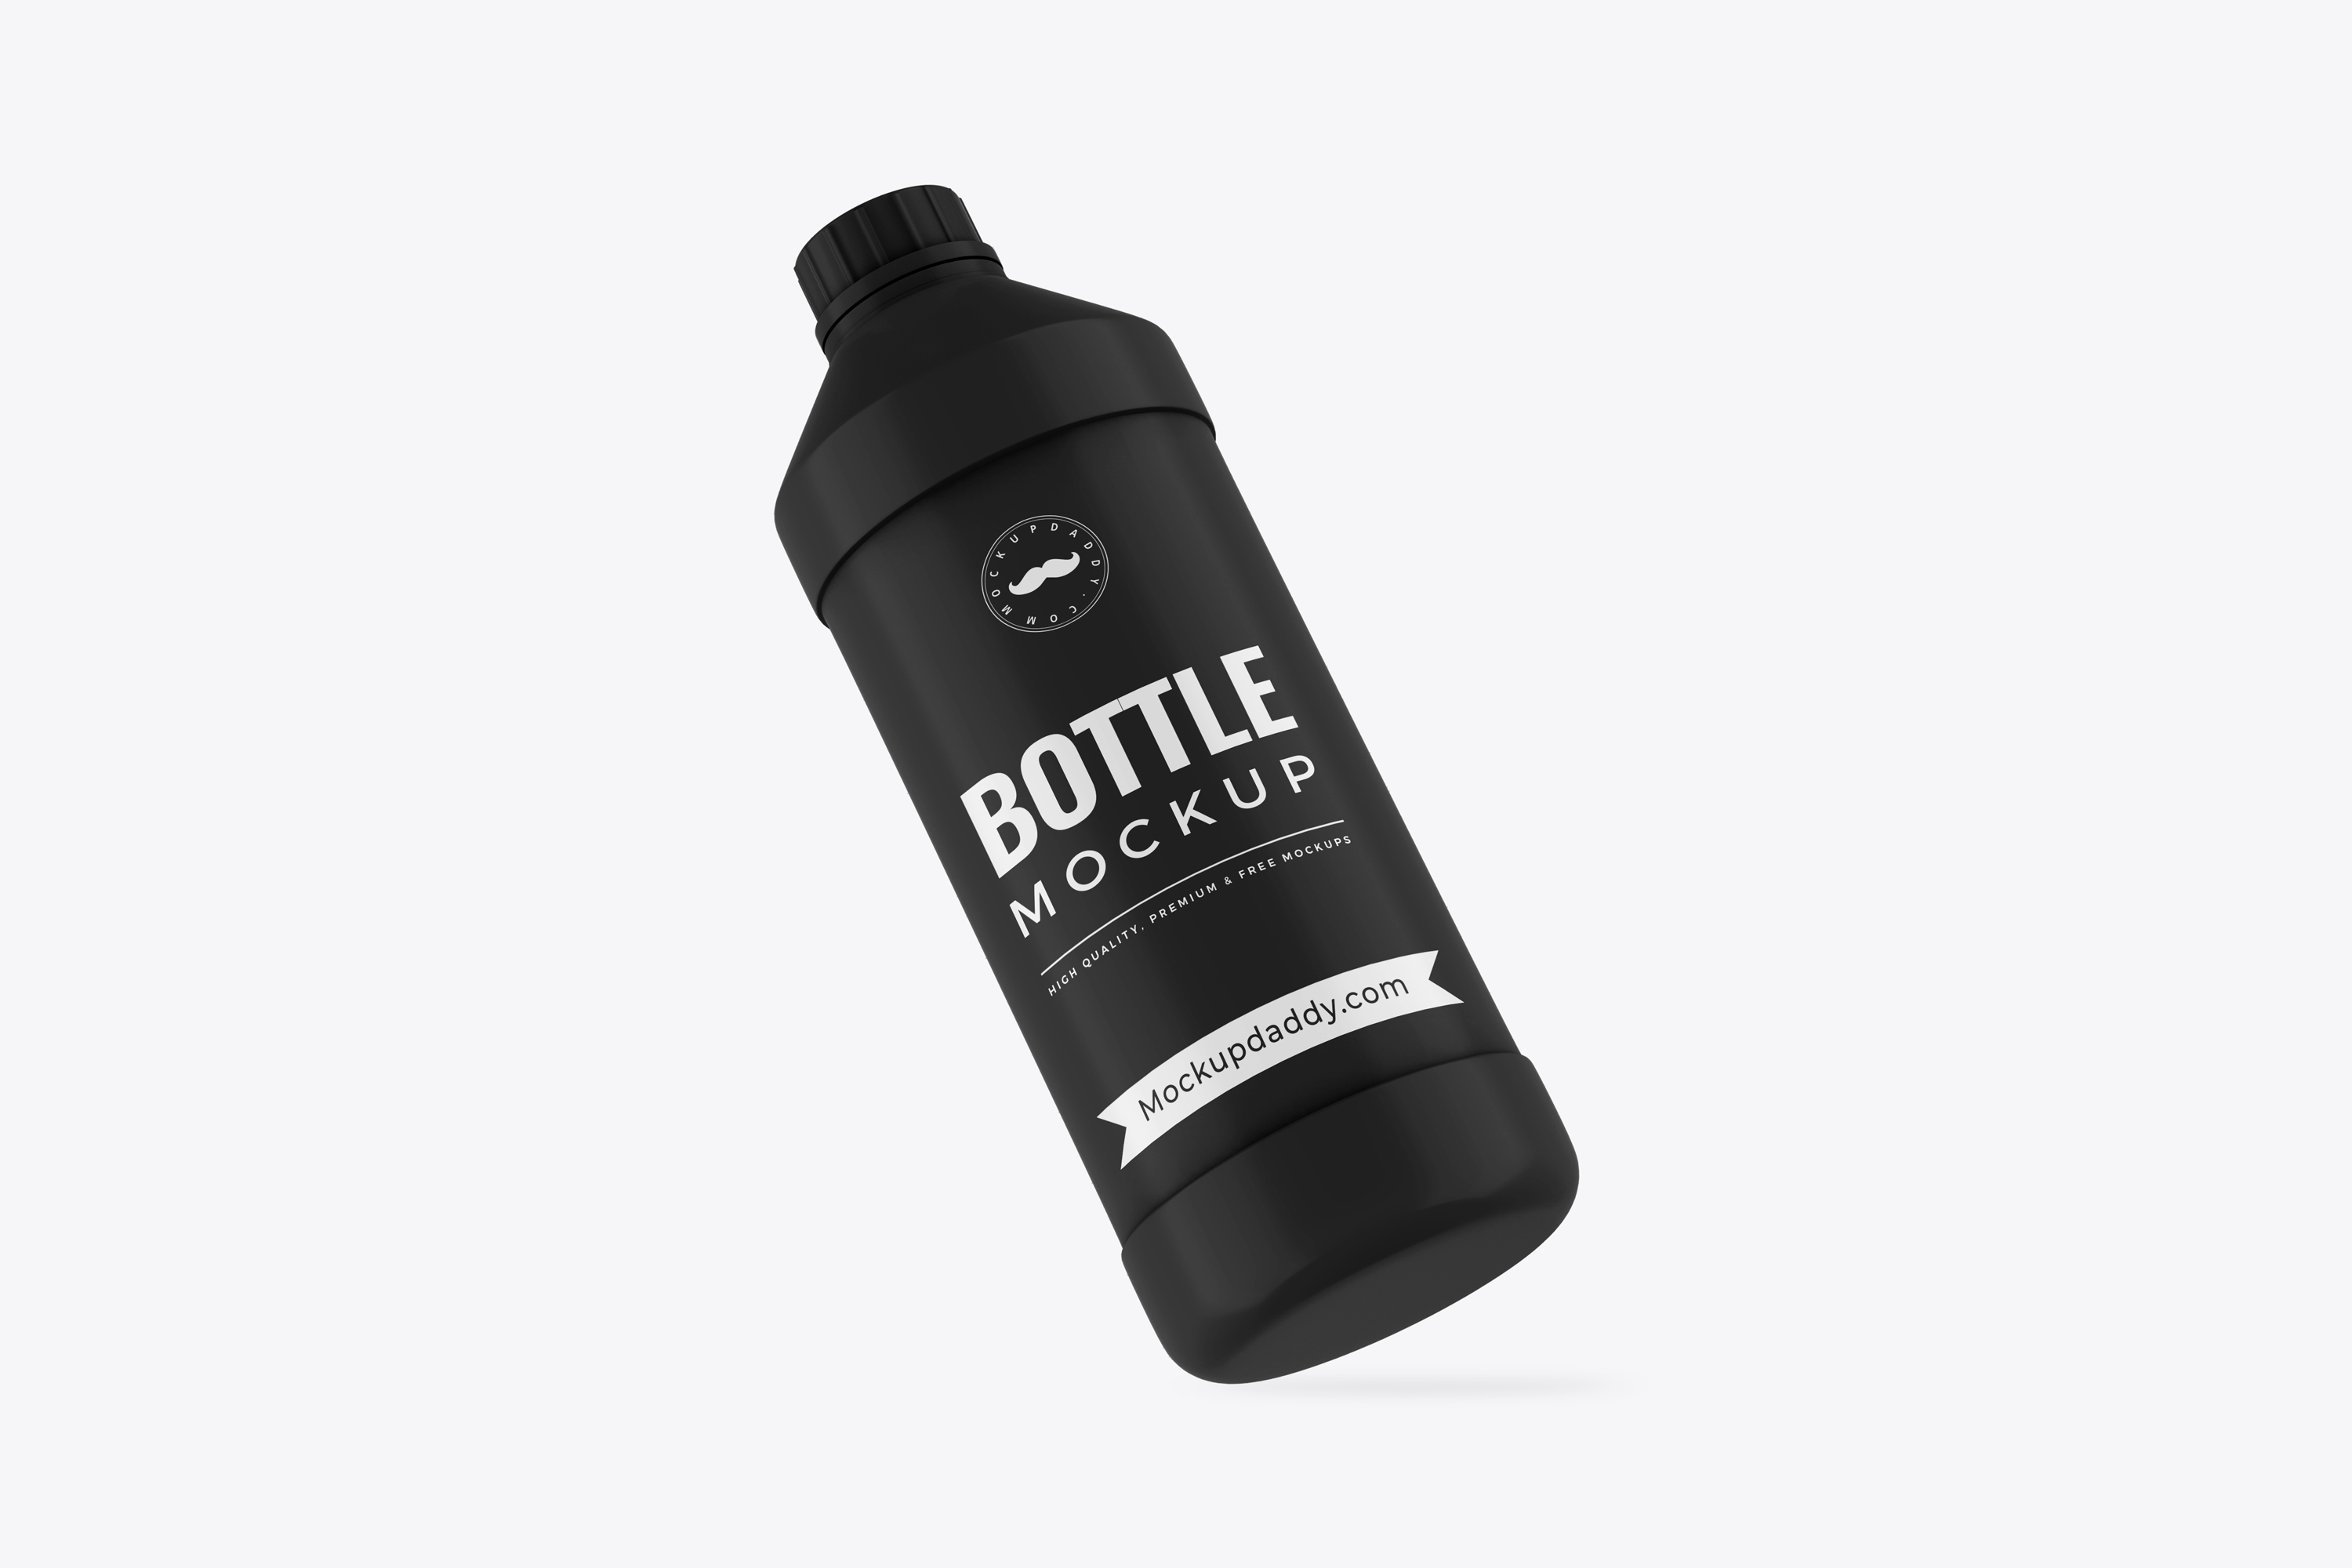 Black Detergent Bottle Mockup with white text 